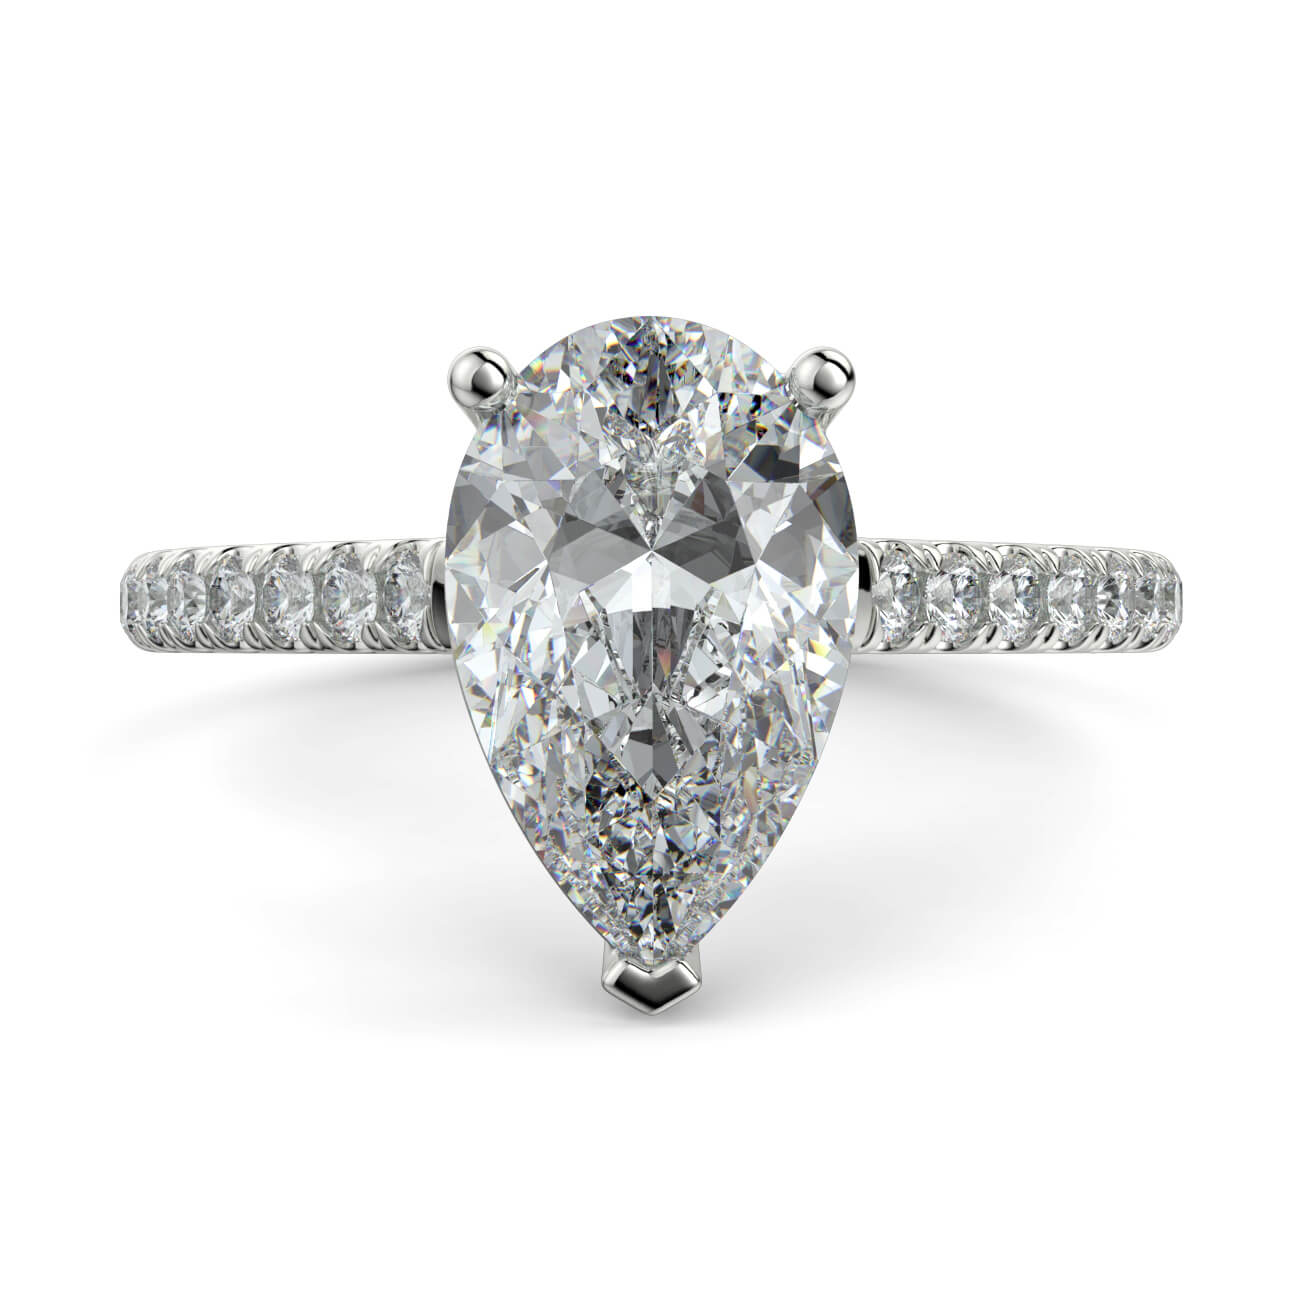 Pear shape diamond cathedral engagement ring in white gold – Australian Diamond Network